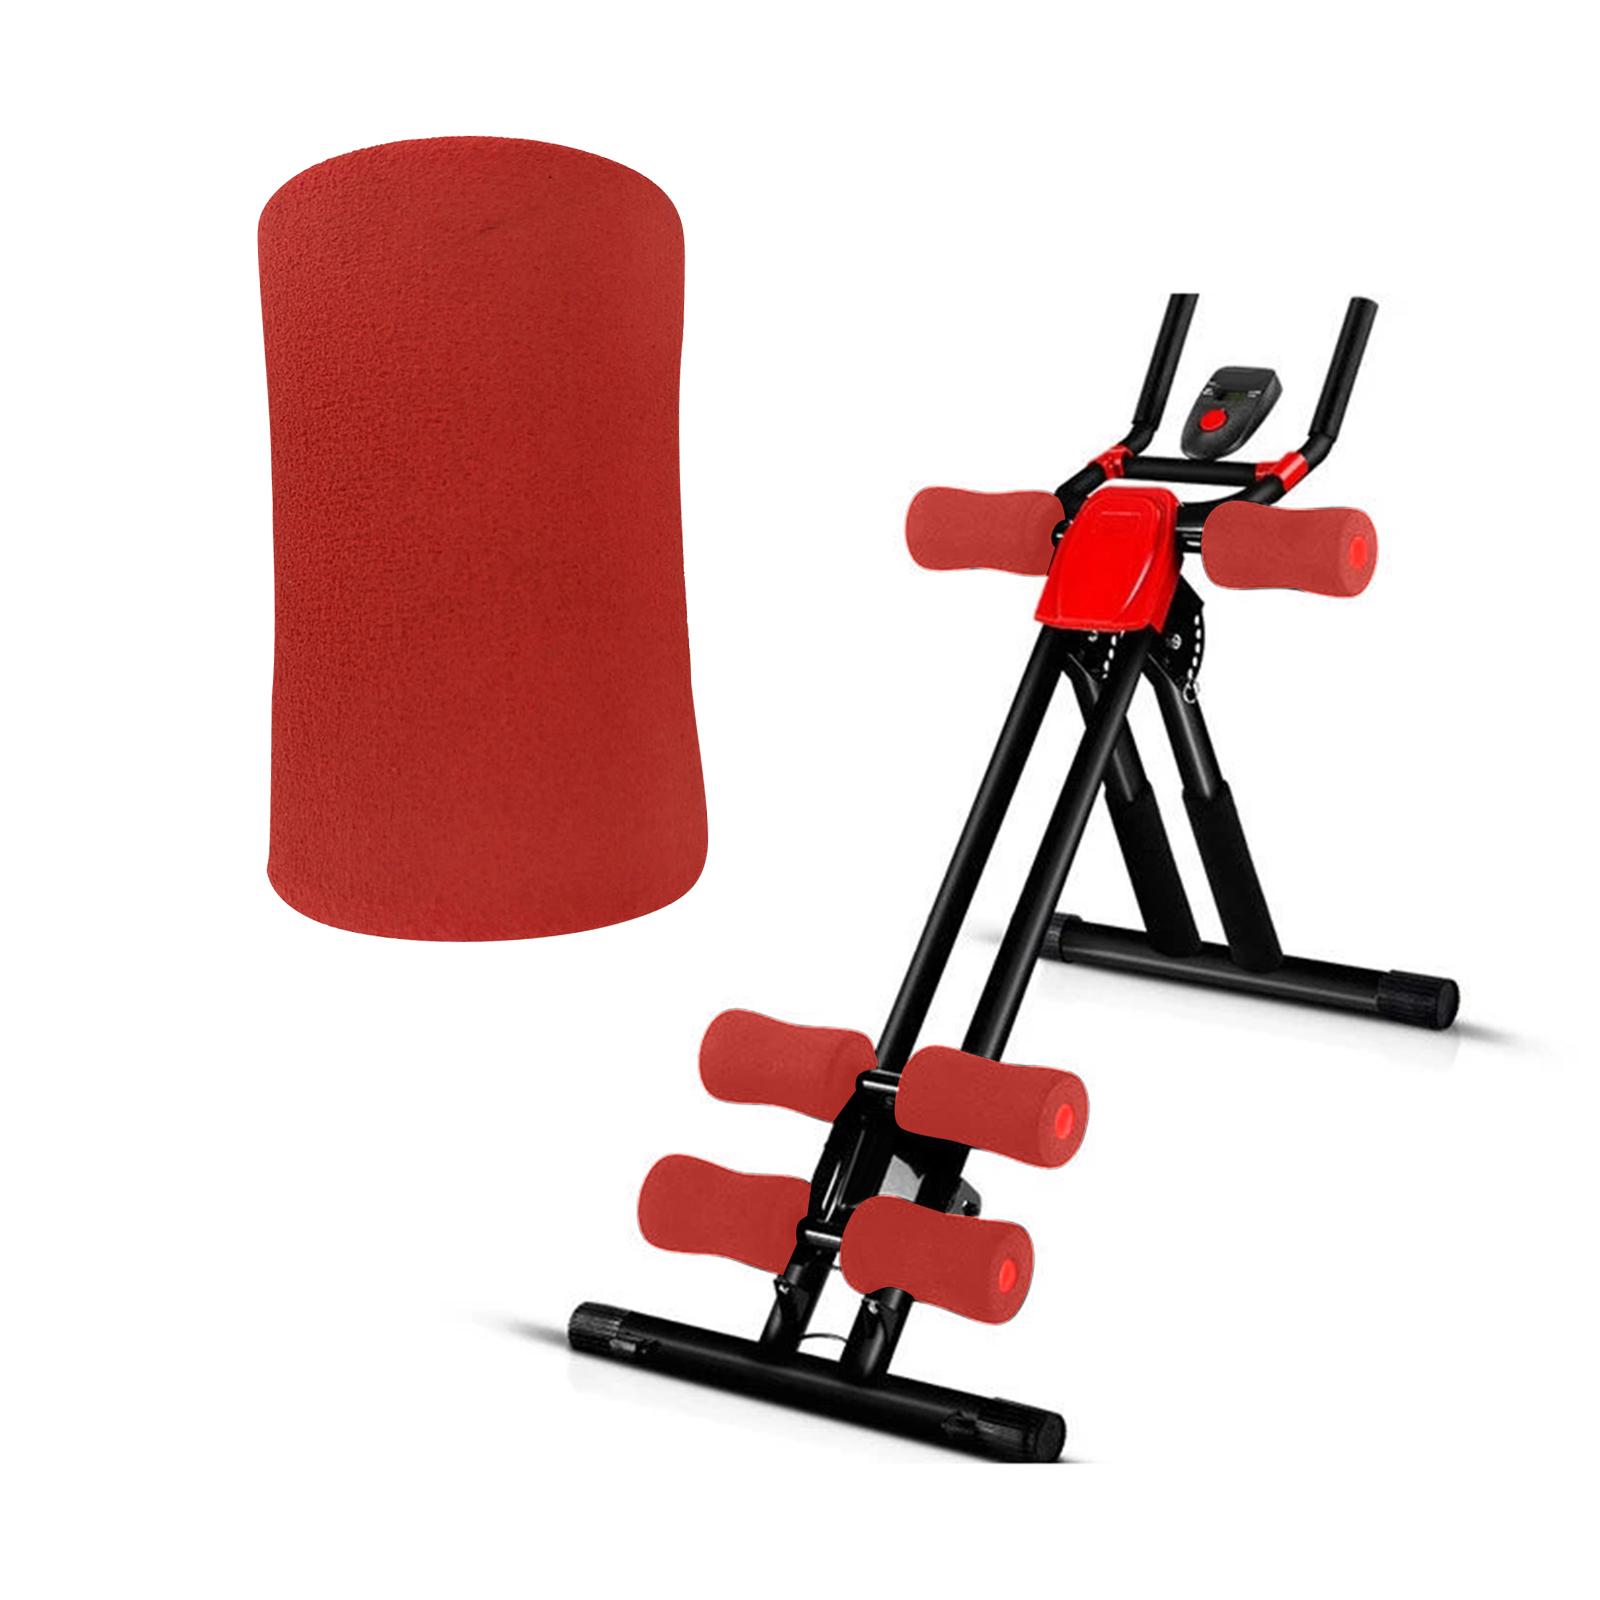 Foam Foot Pads Rollers for Weight Bench Abdominal Trainer Workout Machine Red